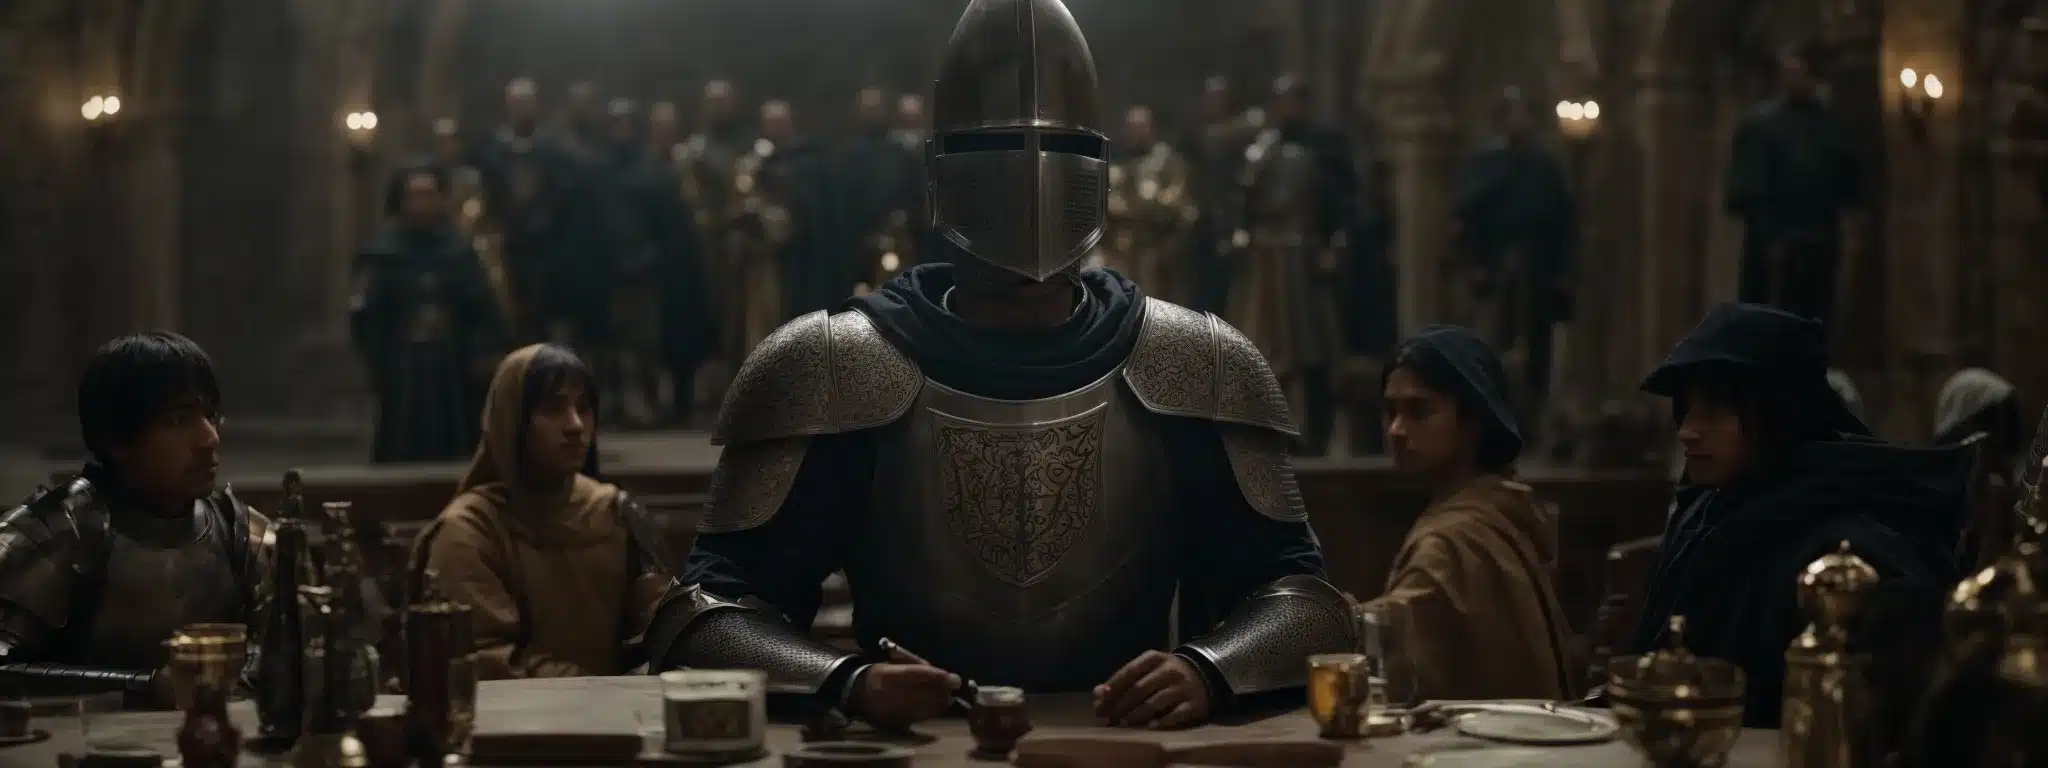 A Knight In Shining Armor Stands Before A Large, Round Table, With Various Symbolic Items Aligned To Represent Different Social Media Platforms.